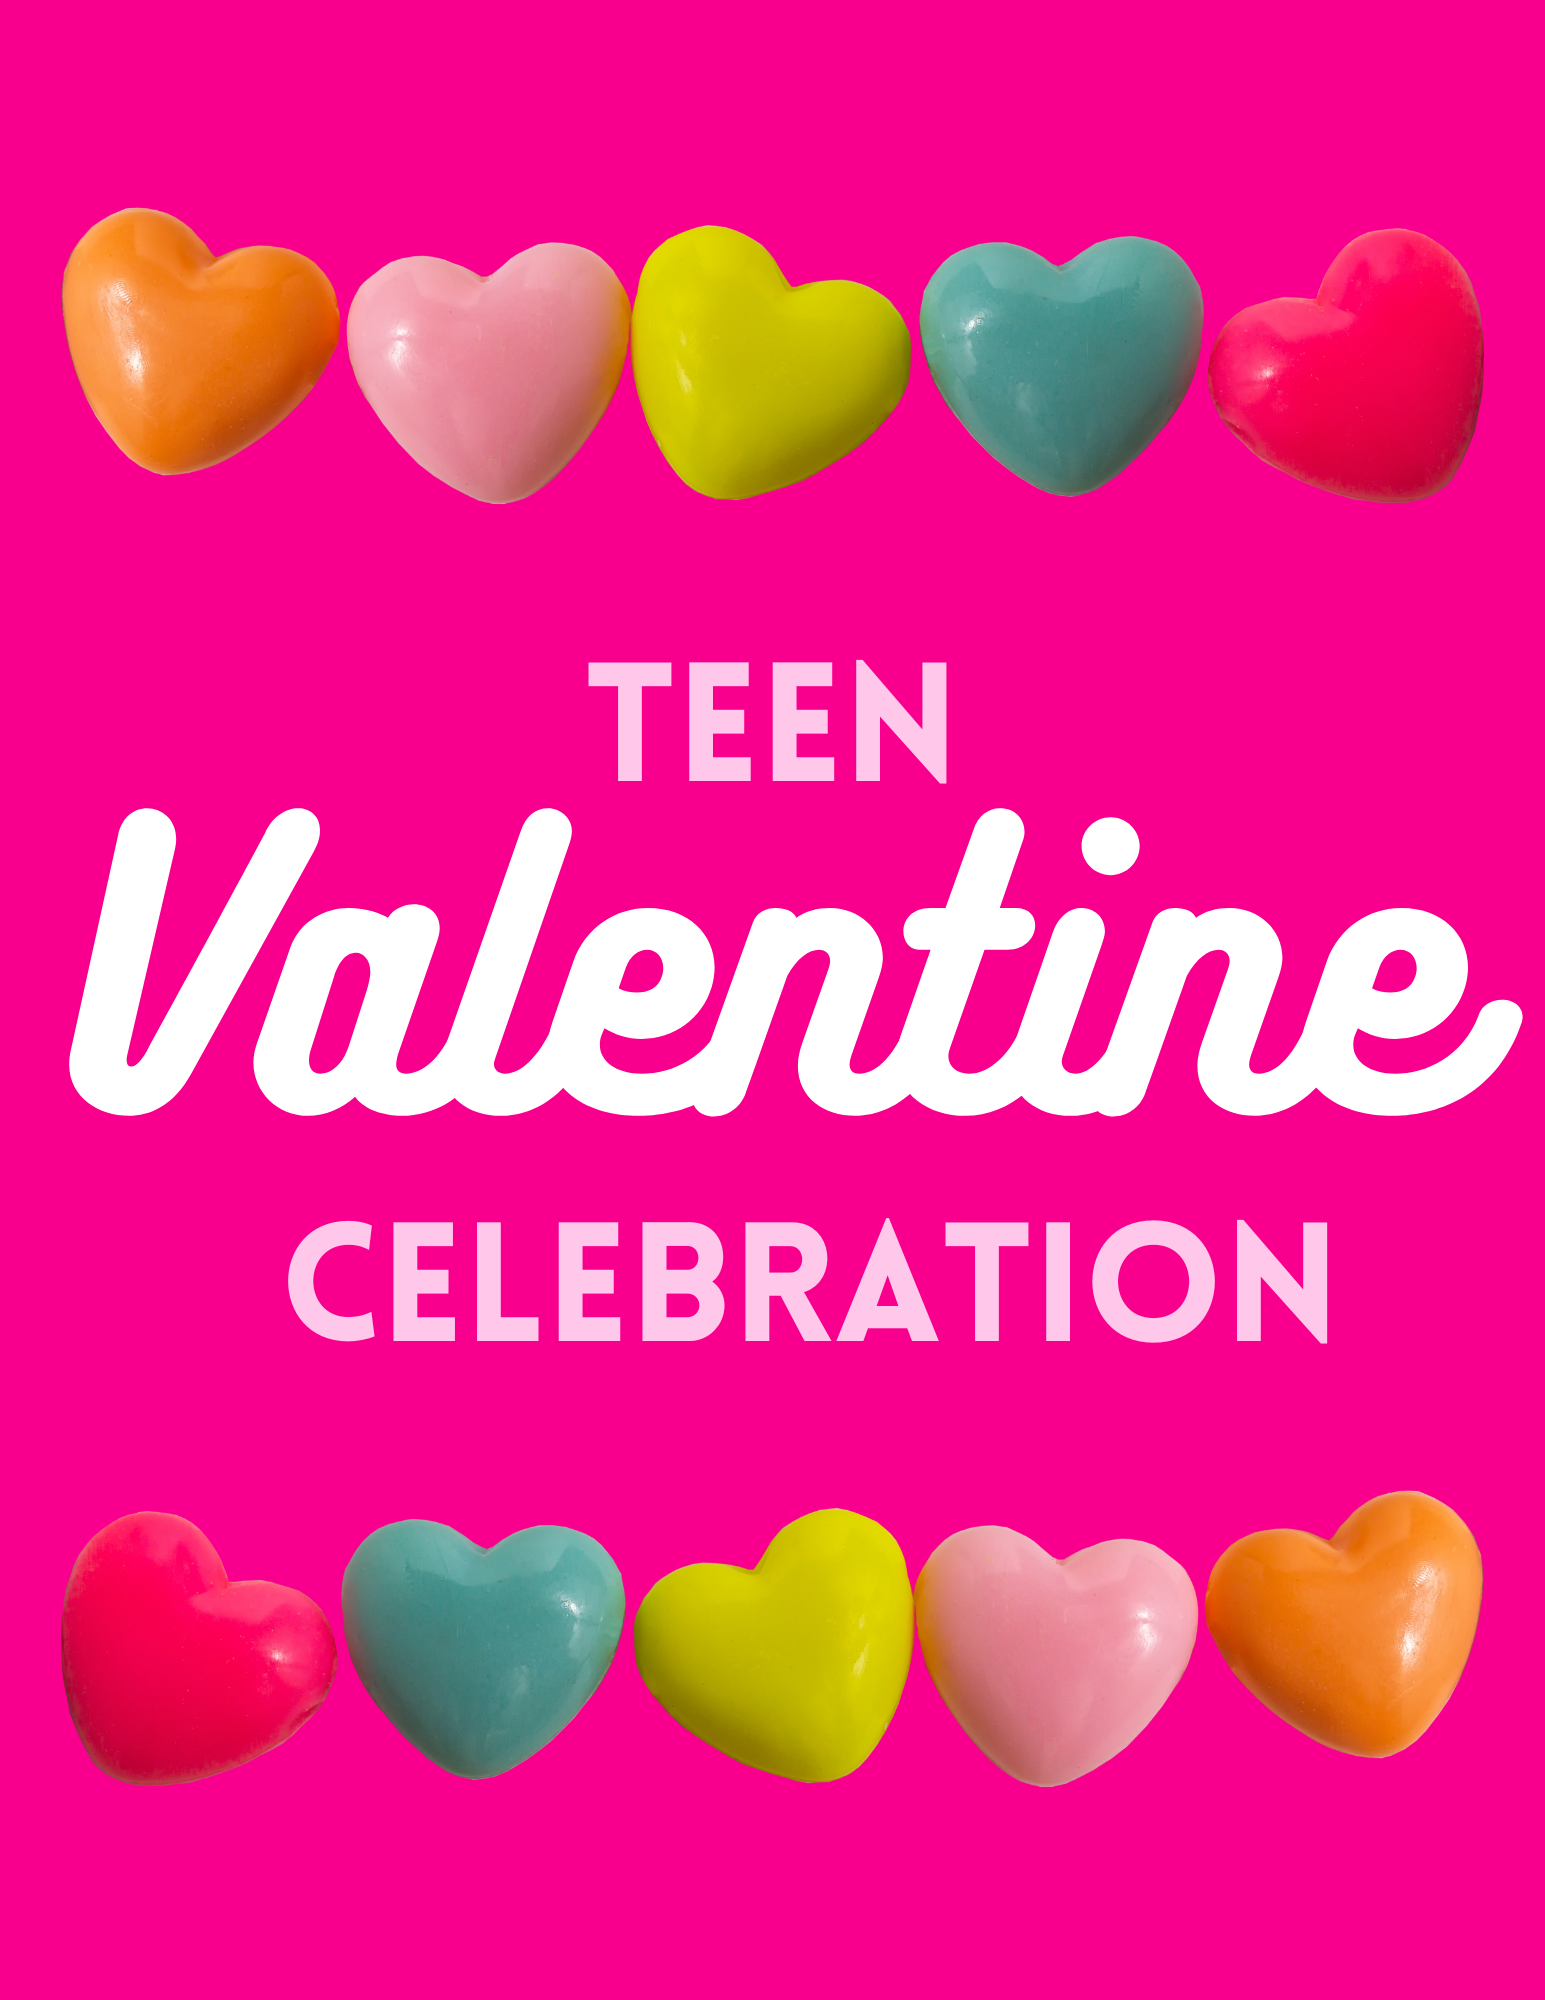 "Teen Valentine Celebration" with candy hearts lining the top and bottom.